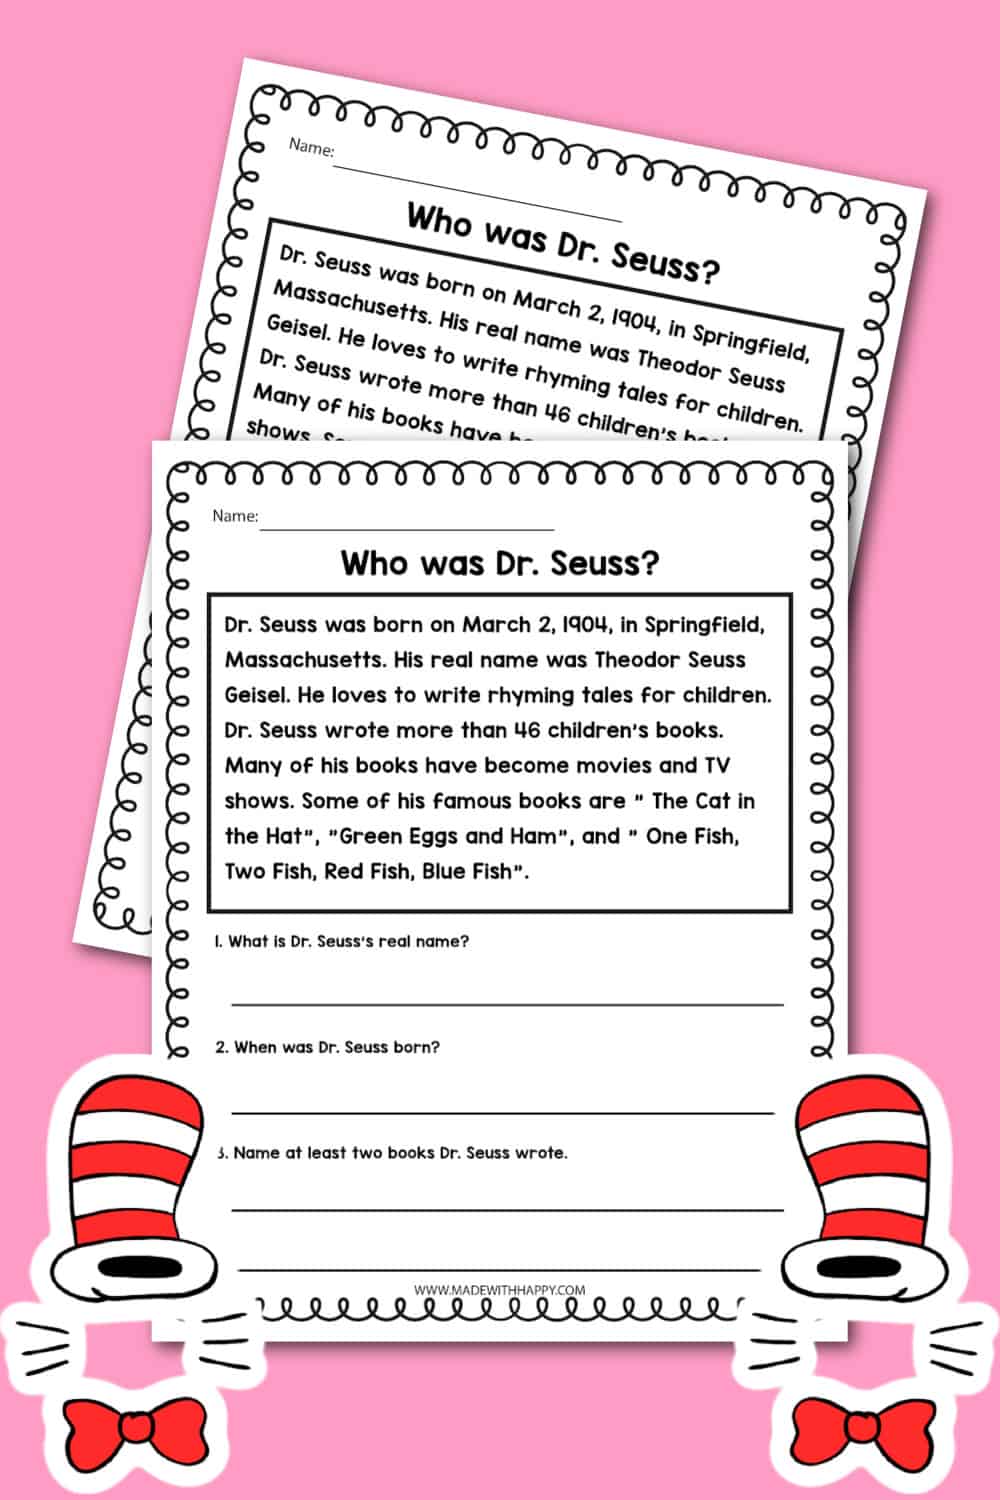 Who Was Dr. Seuss